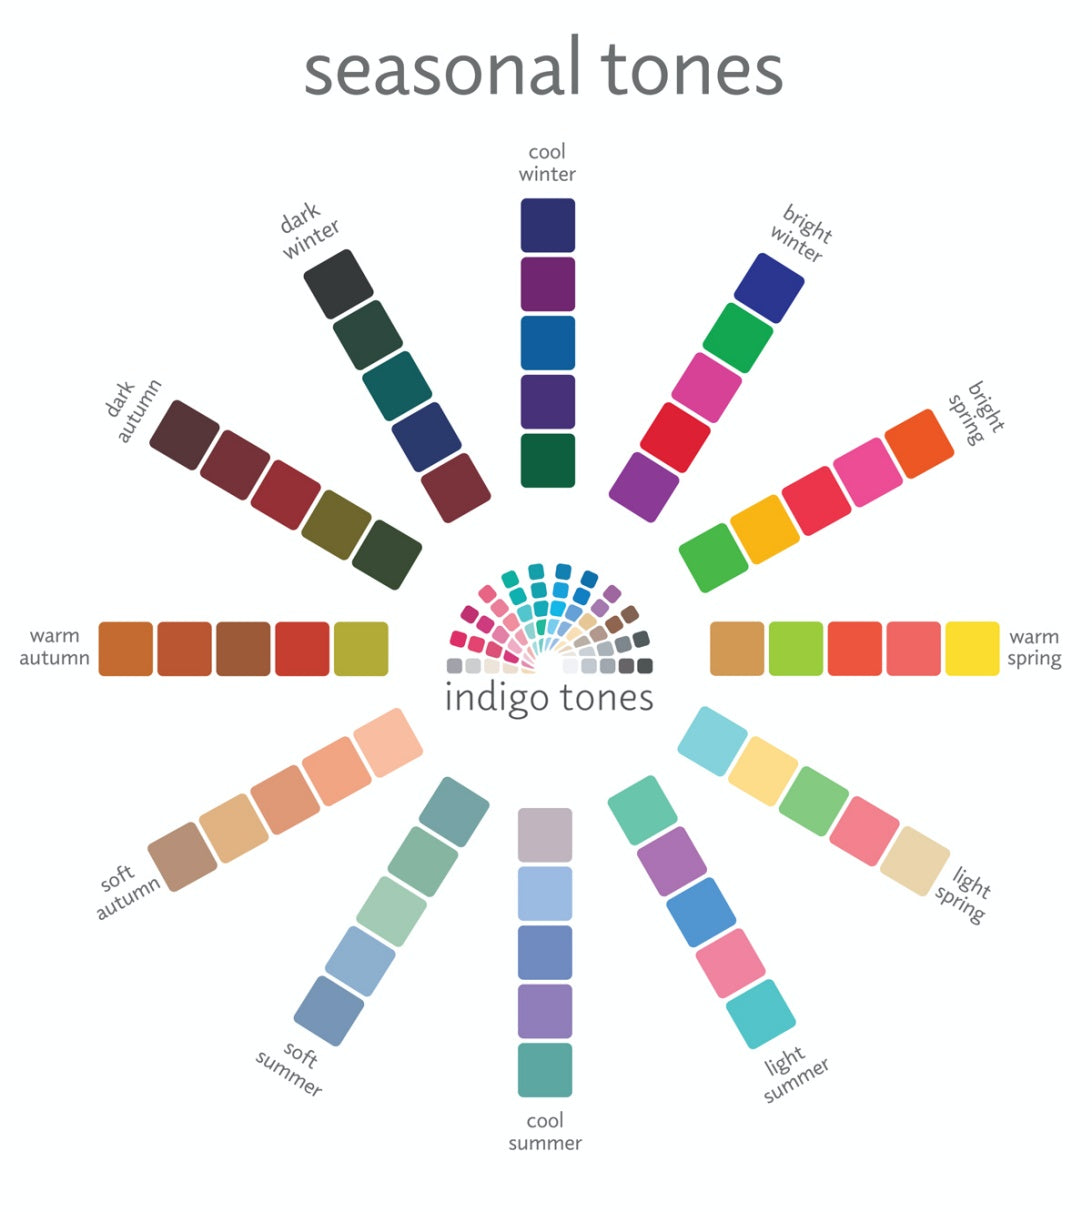 Indigo Tones Personal Color Analysis Services & Products